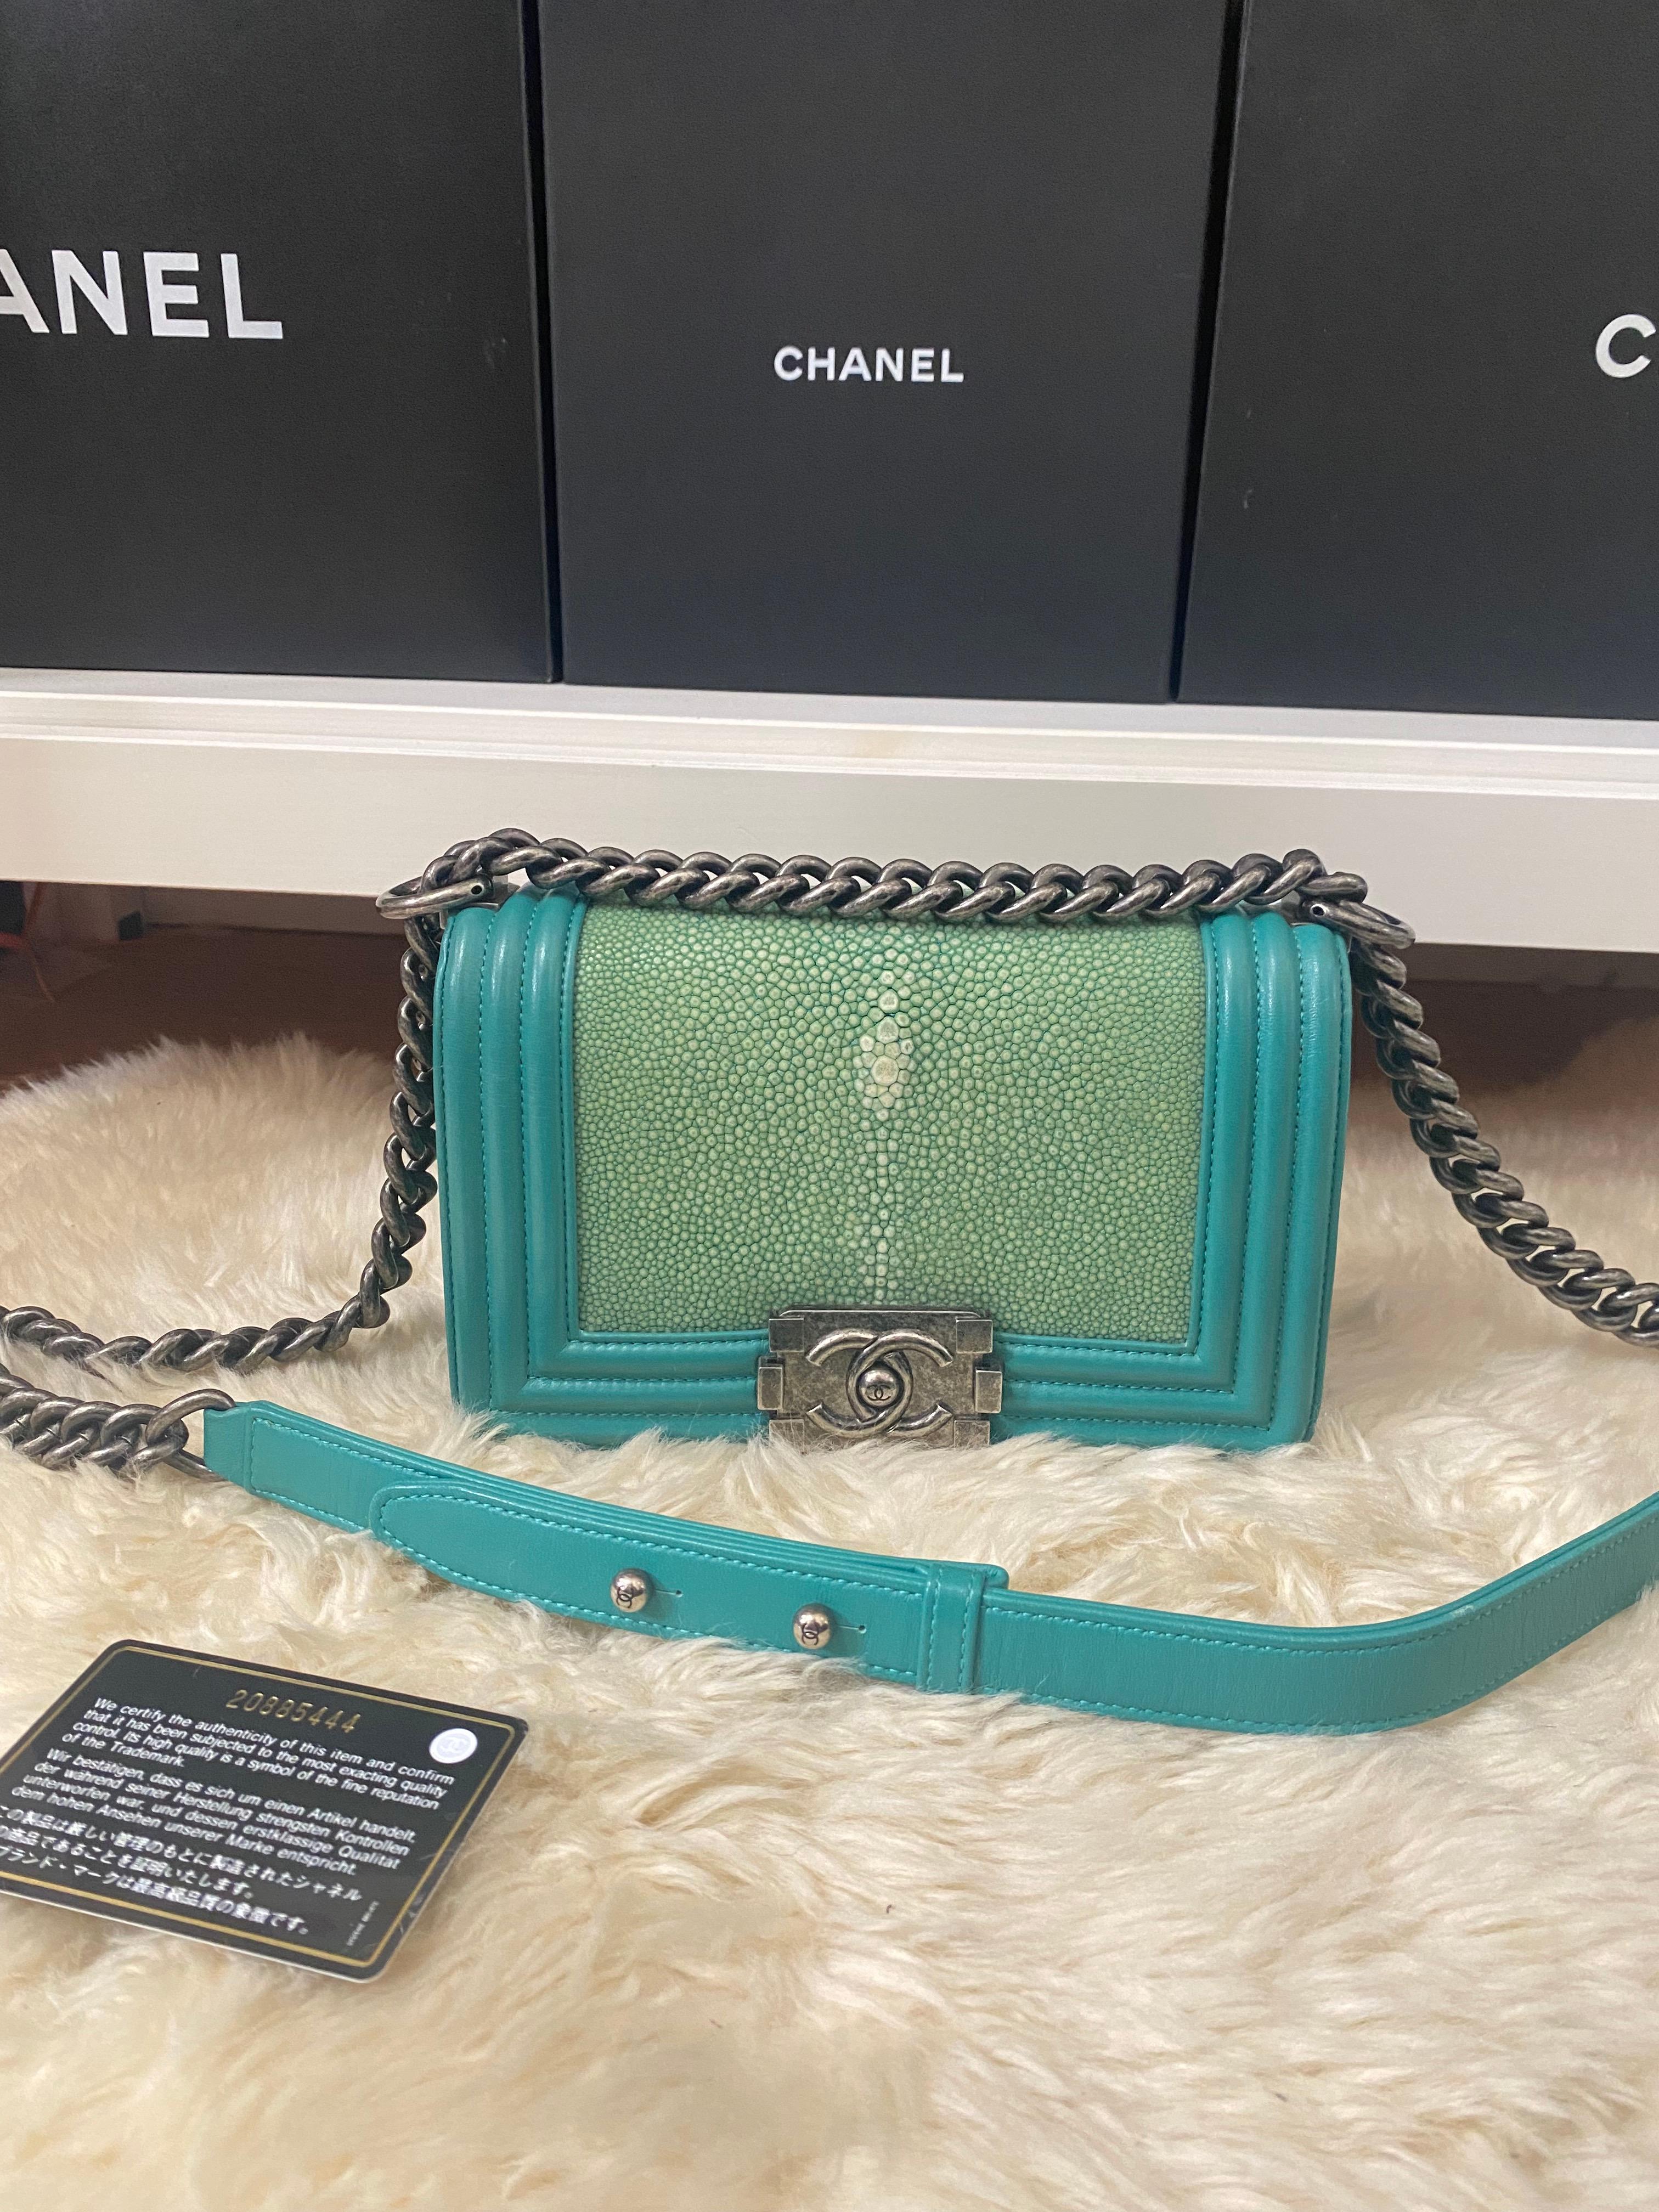 Chanel Stingray Boy Small Green 

Exterior Color: Green
Interior Color: Gray
Exterior Material: Leather, Stingray, Exotic
Interior Material: Fabric
Hardware Color: Aged Silver
Accessories: Card
Serial: 20 series
SIZE AND FIT: 8